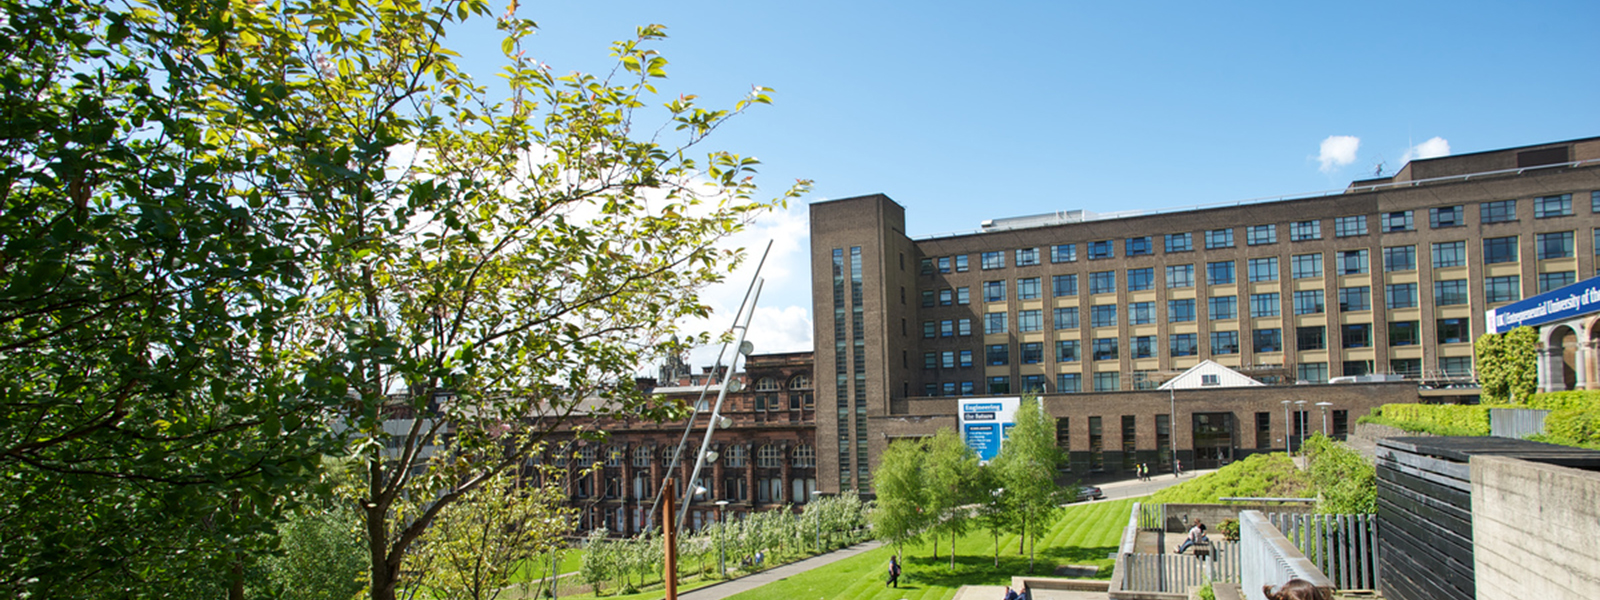 Our rankings & reputation | University of Strathclyde